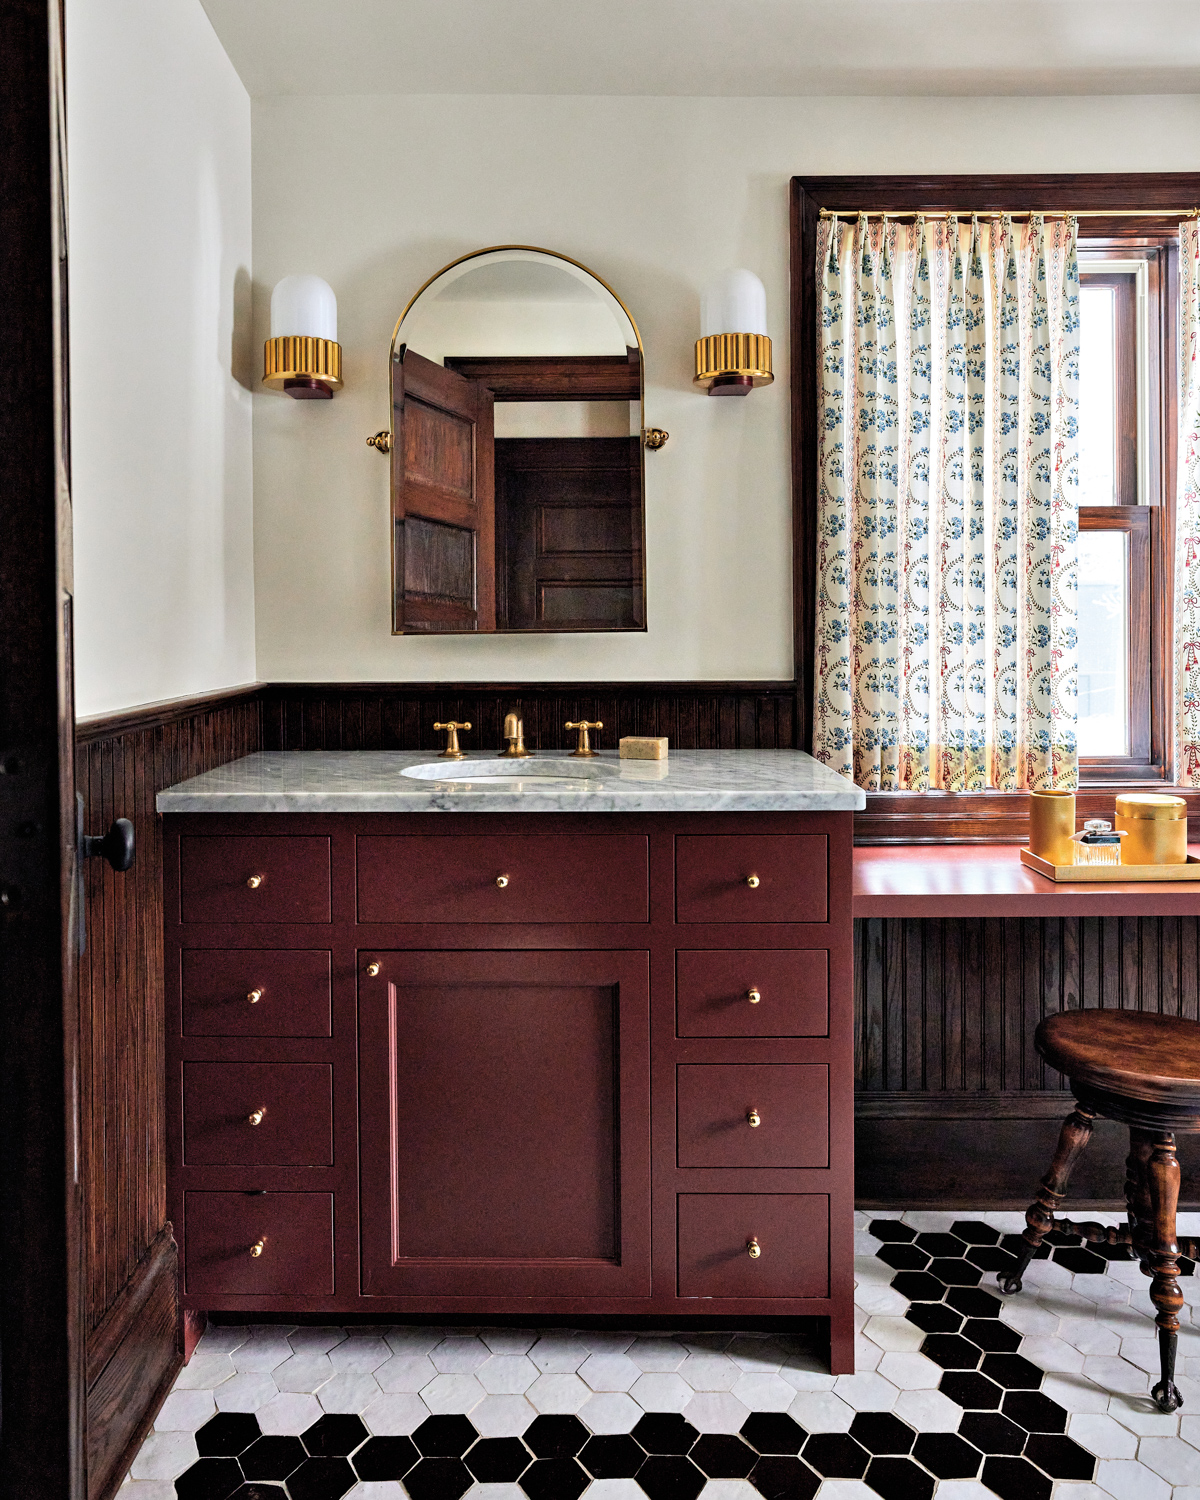 Dealer’s Choice: Seek Solace In These Stunning Bathrooms